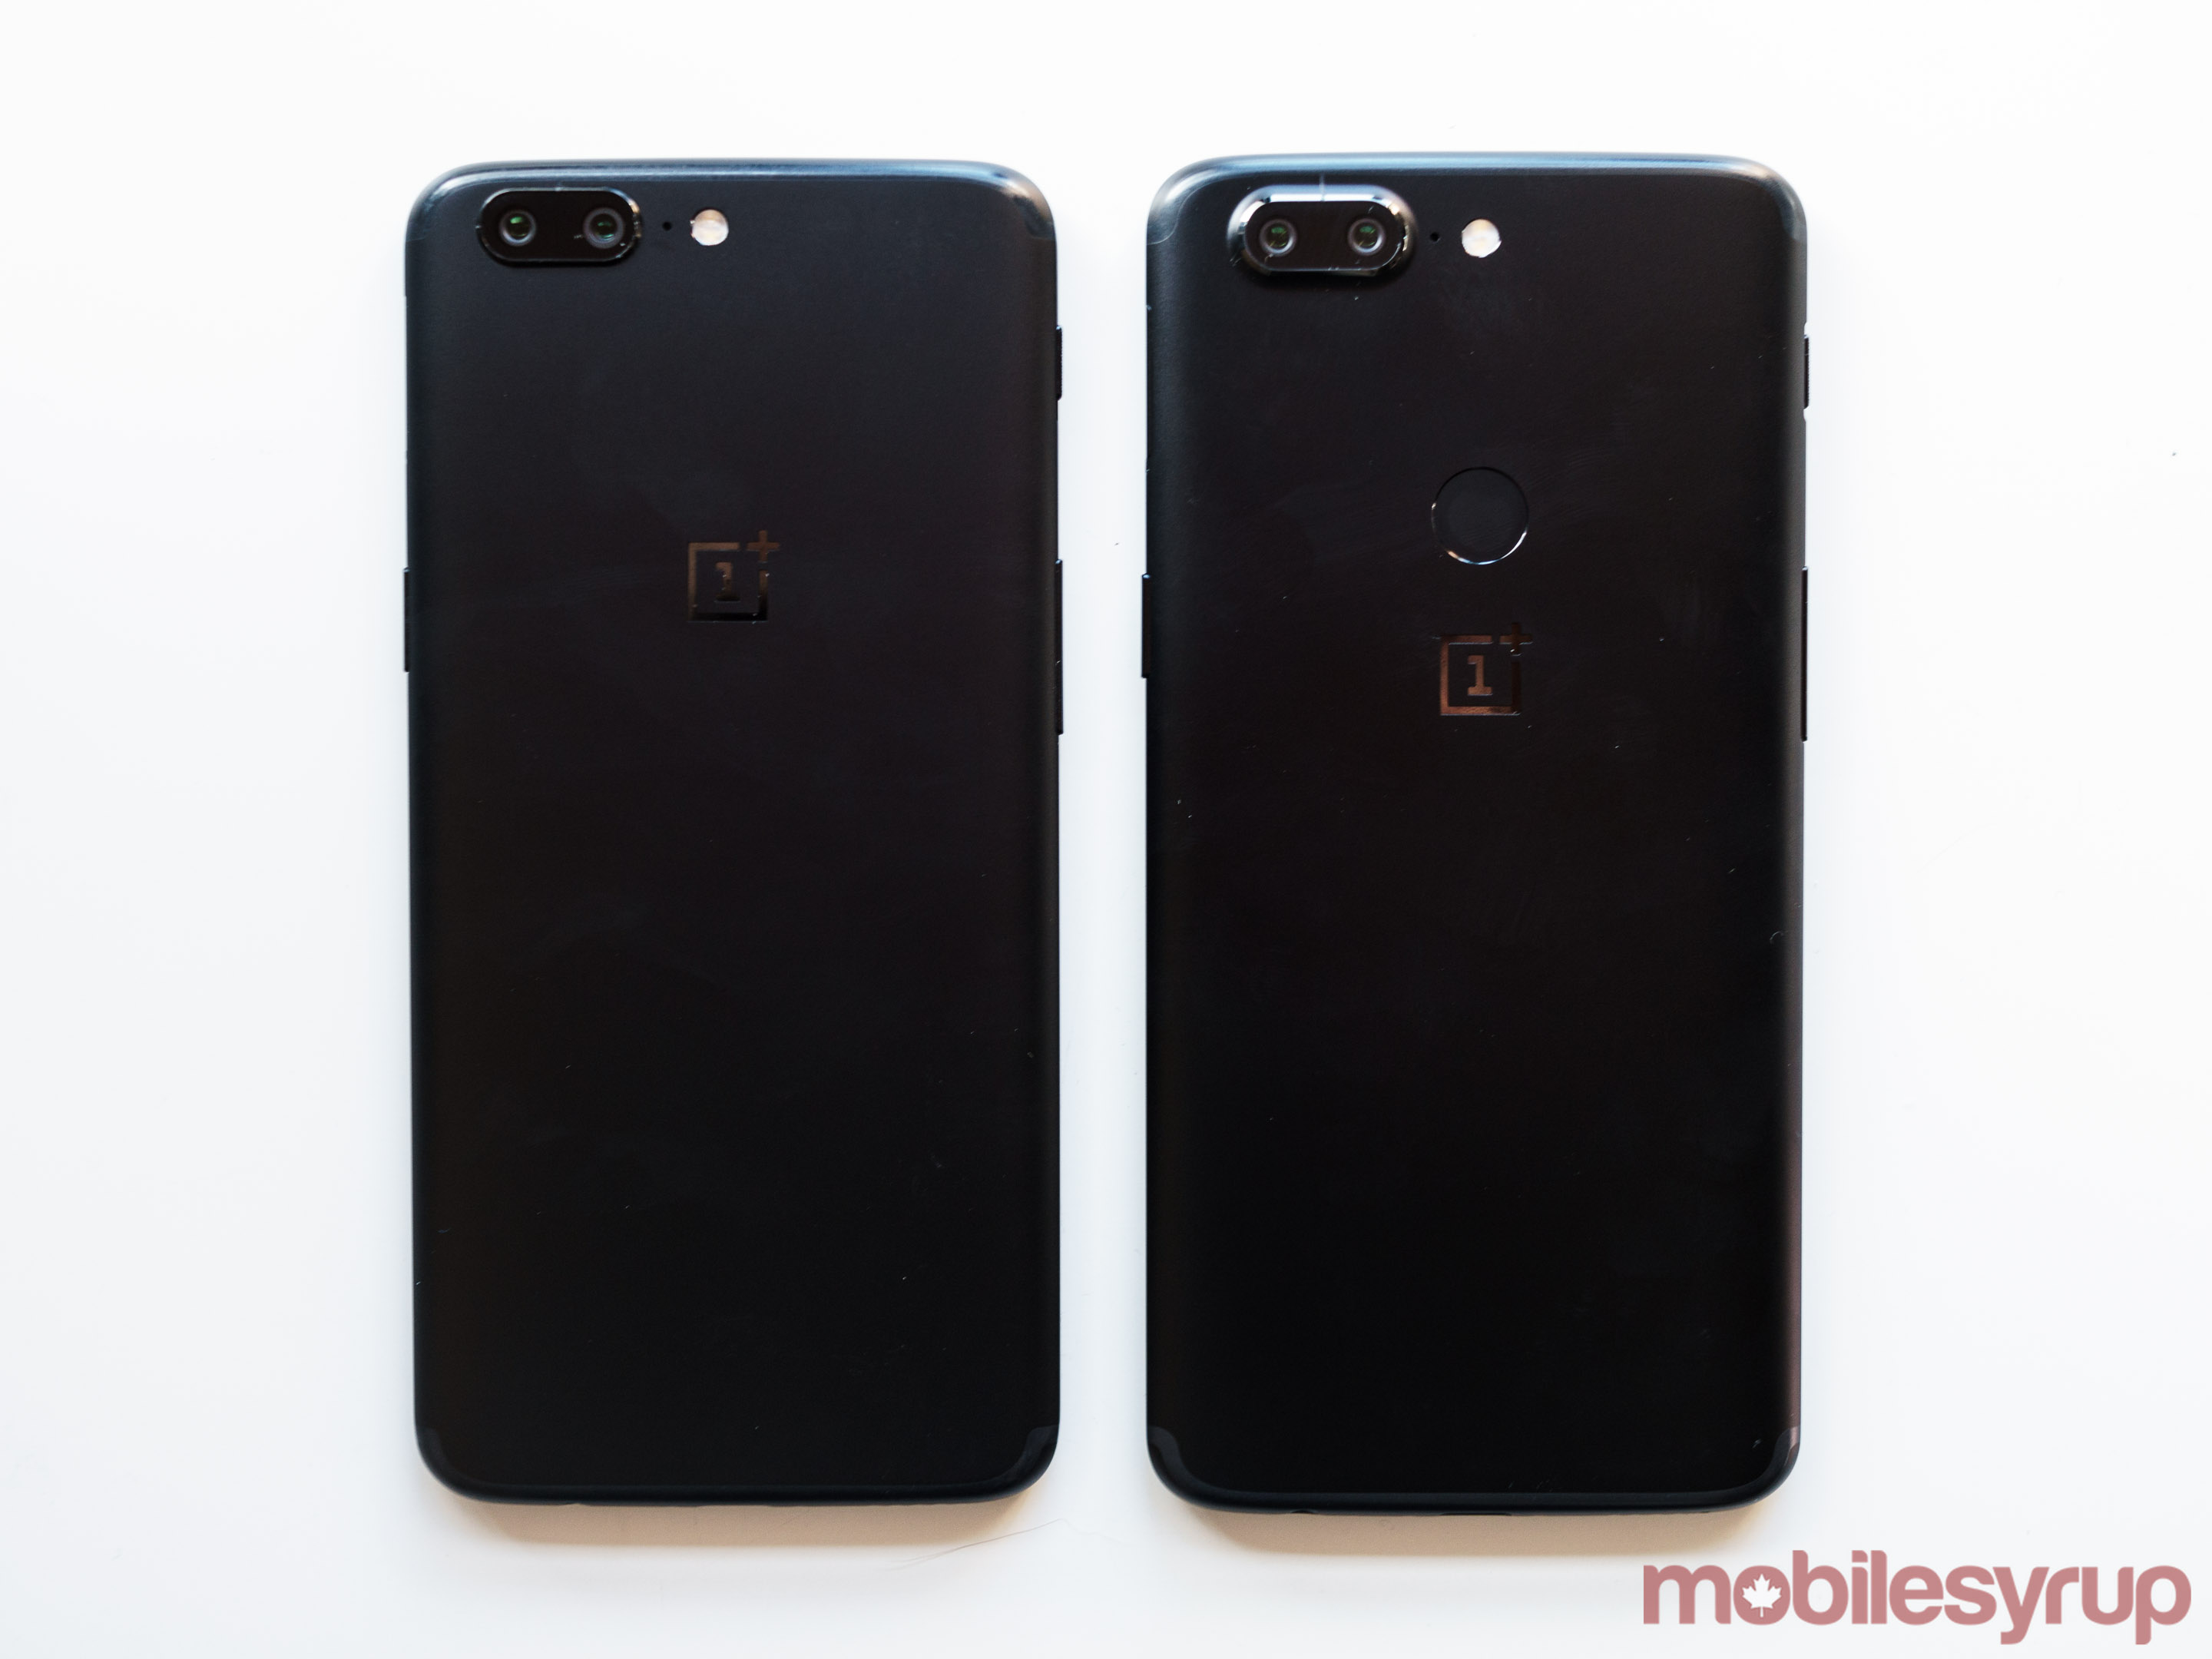 A comparison shot of the back of the two phones